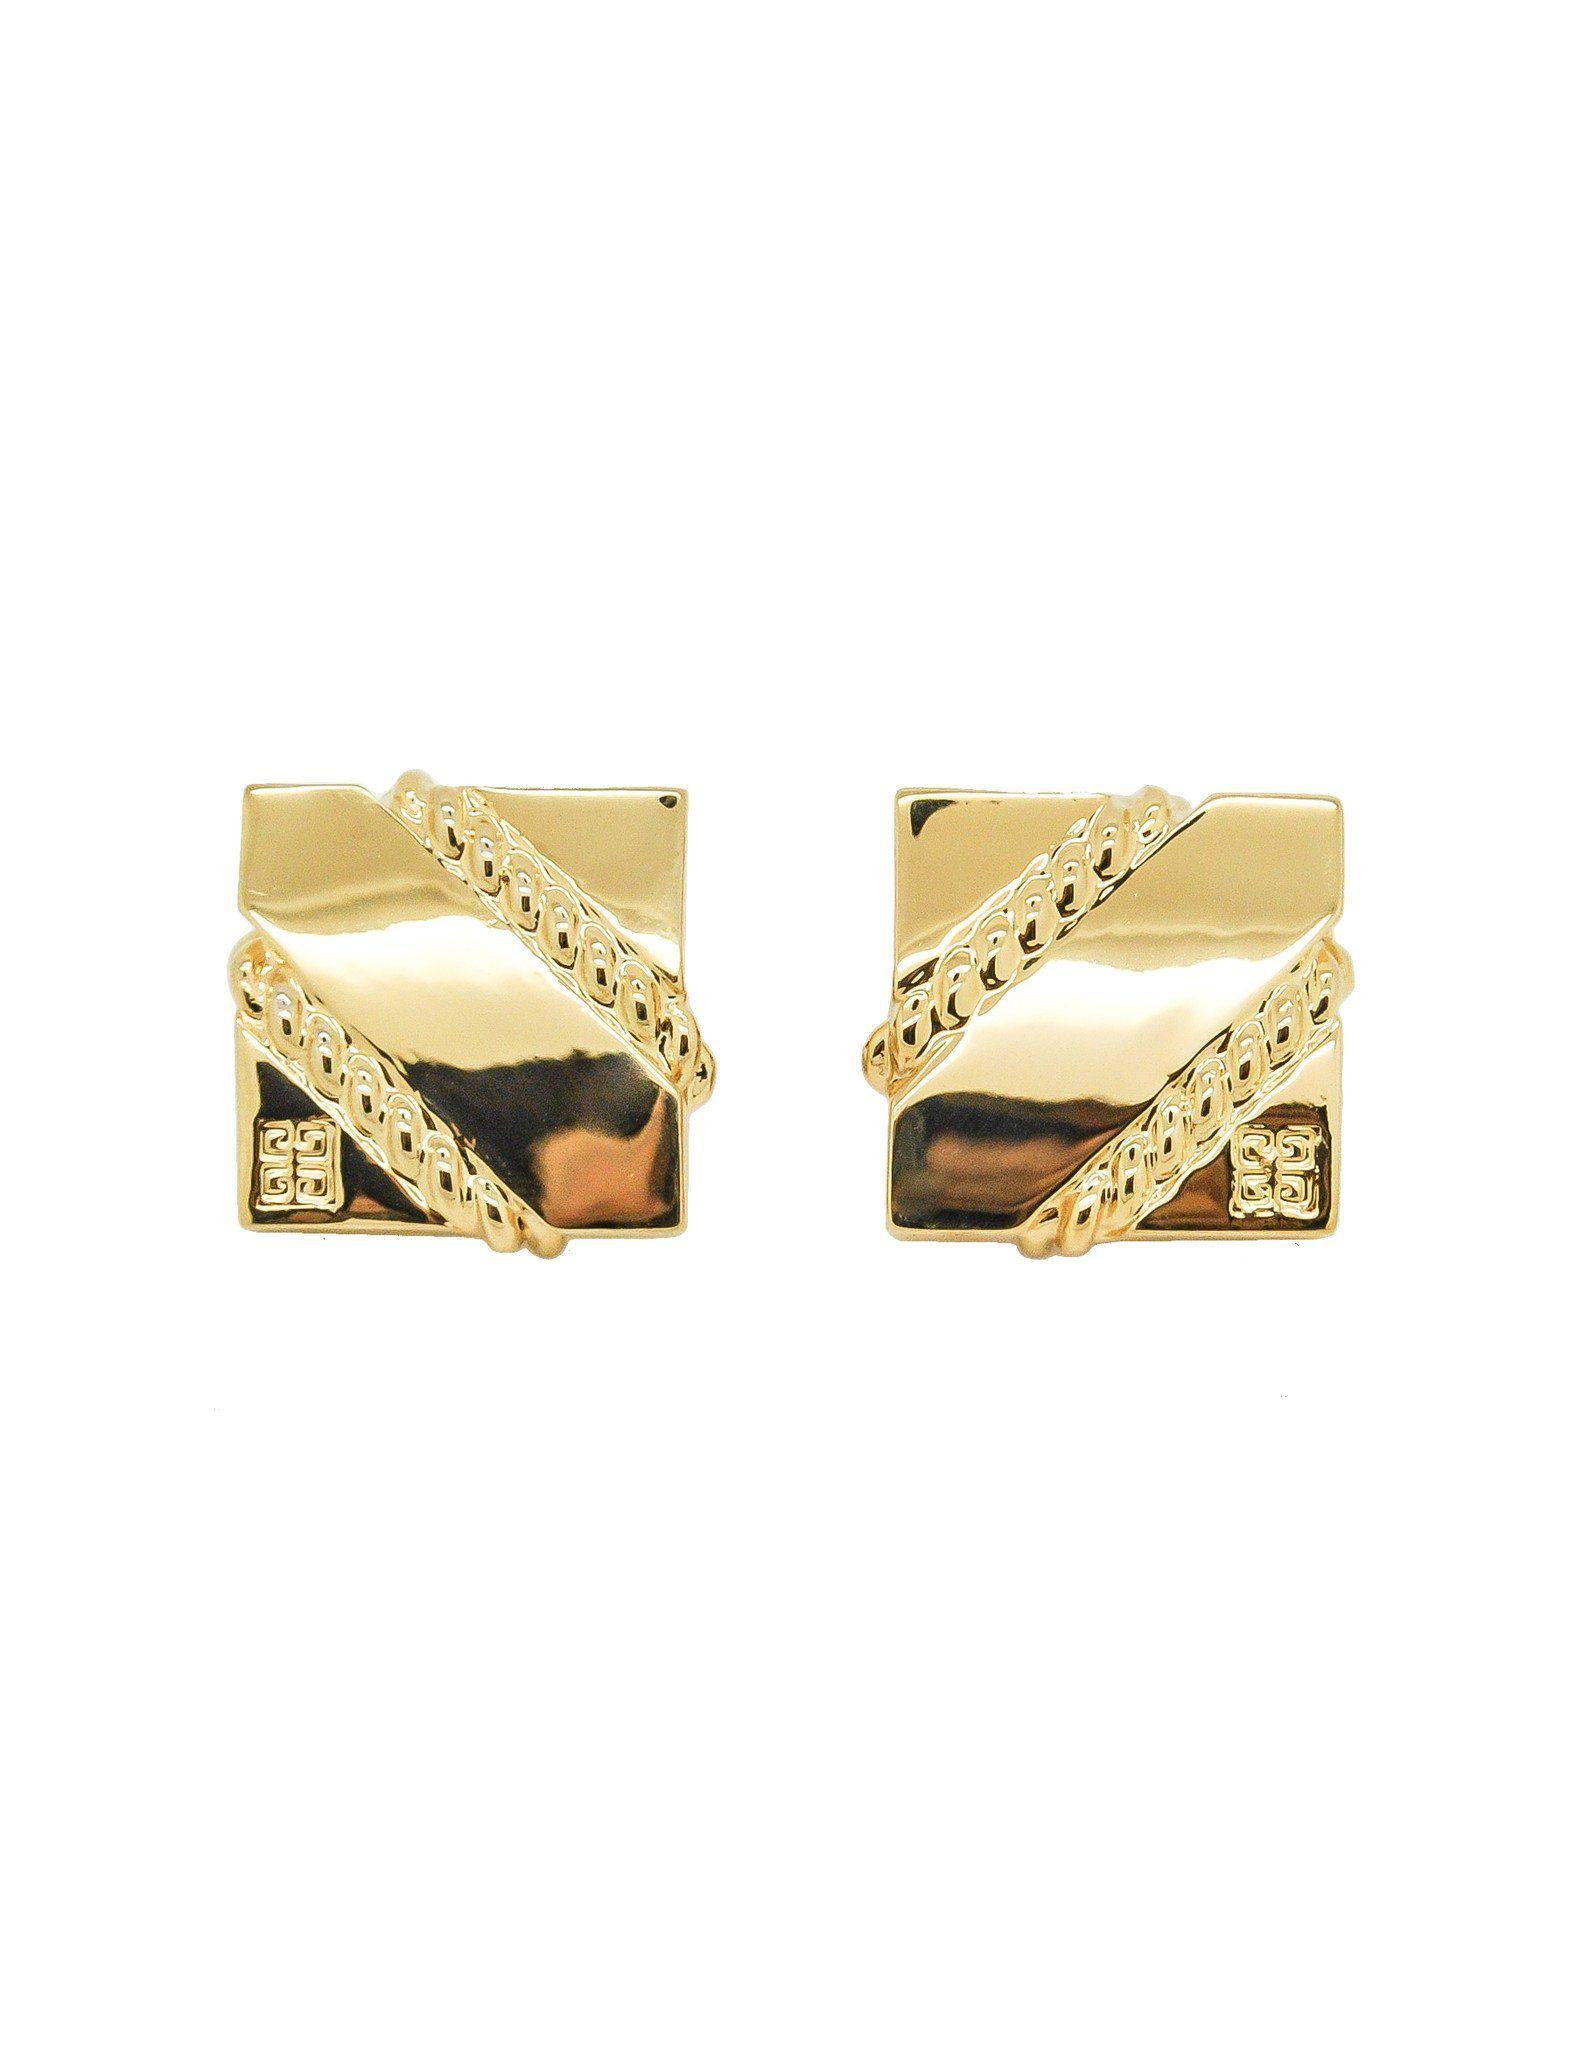 Gold Square Logo - Givenchy Vintage Gold Square Logo Earrings - from Amarcord Vintage ...